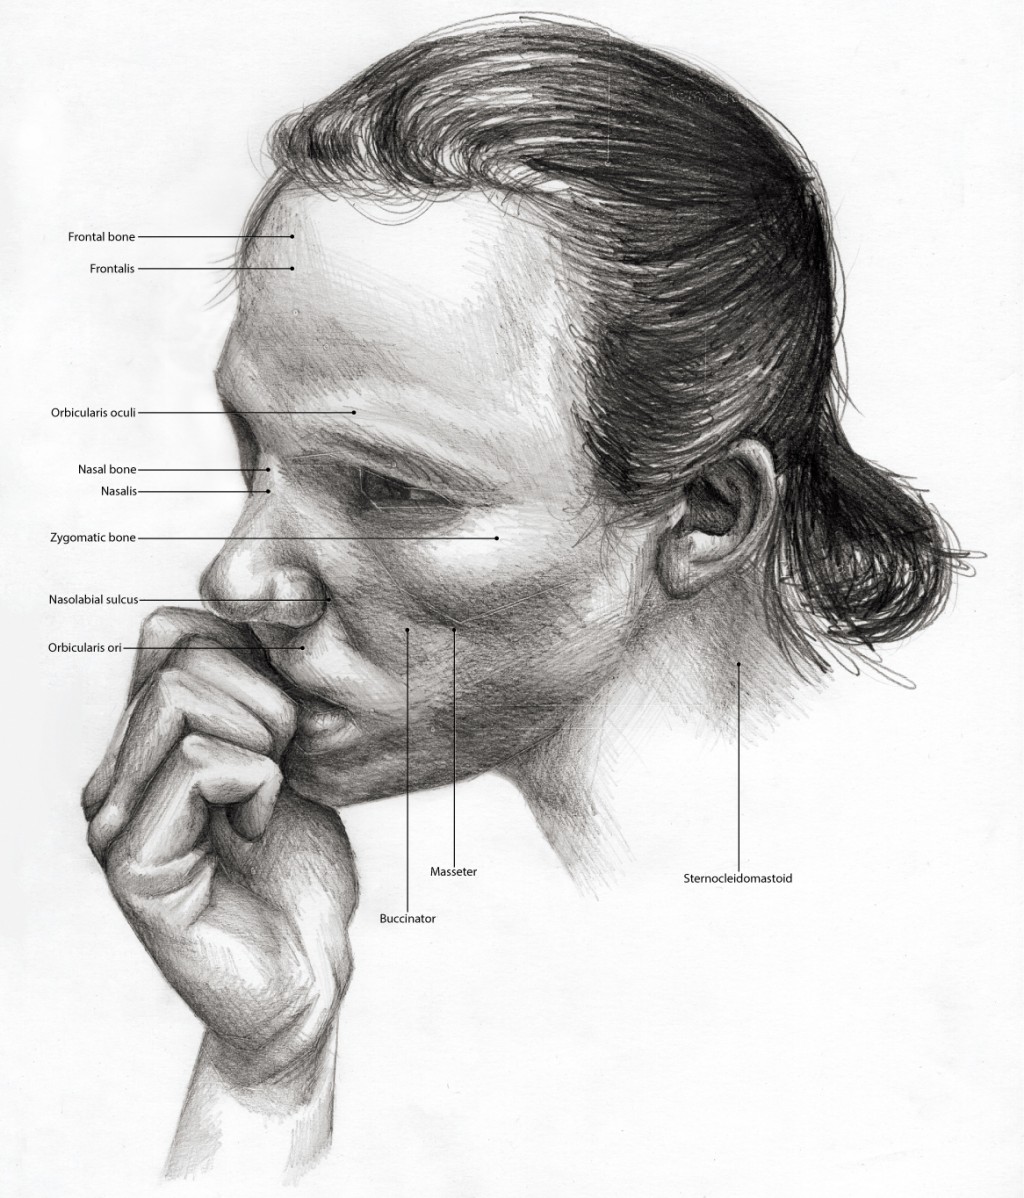  Black and White illustration of someone biting their nails. Anatomical features labeled.